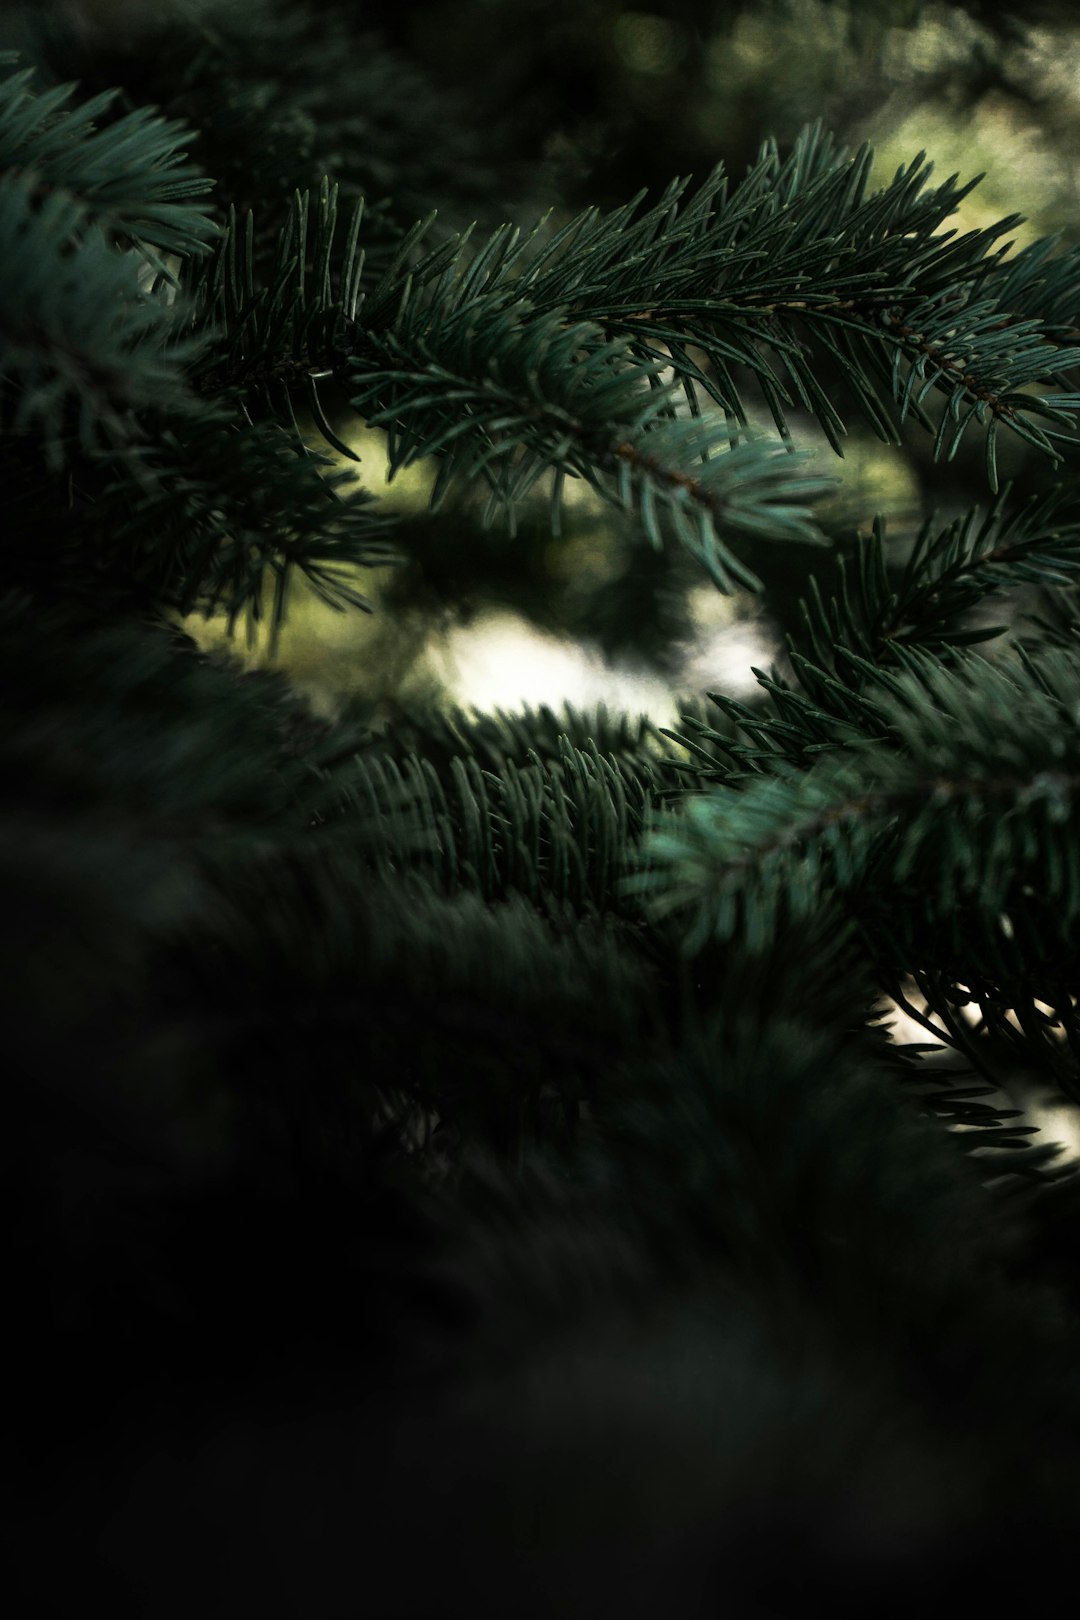 green pine tree in close up photography